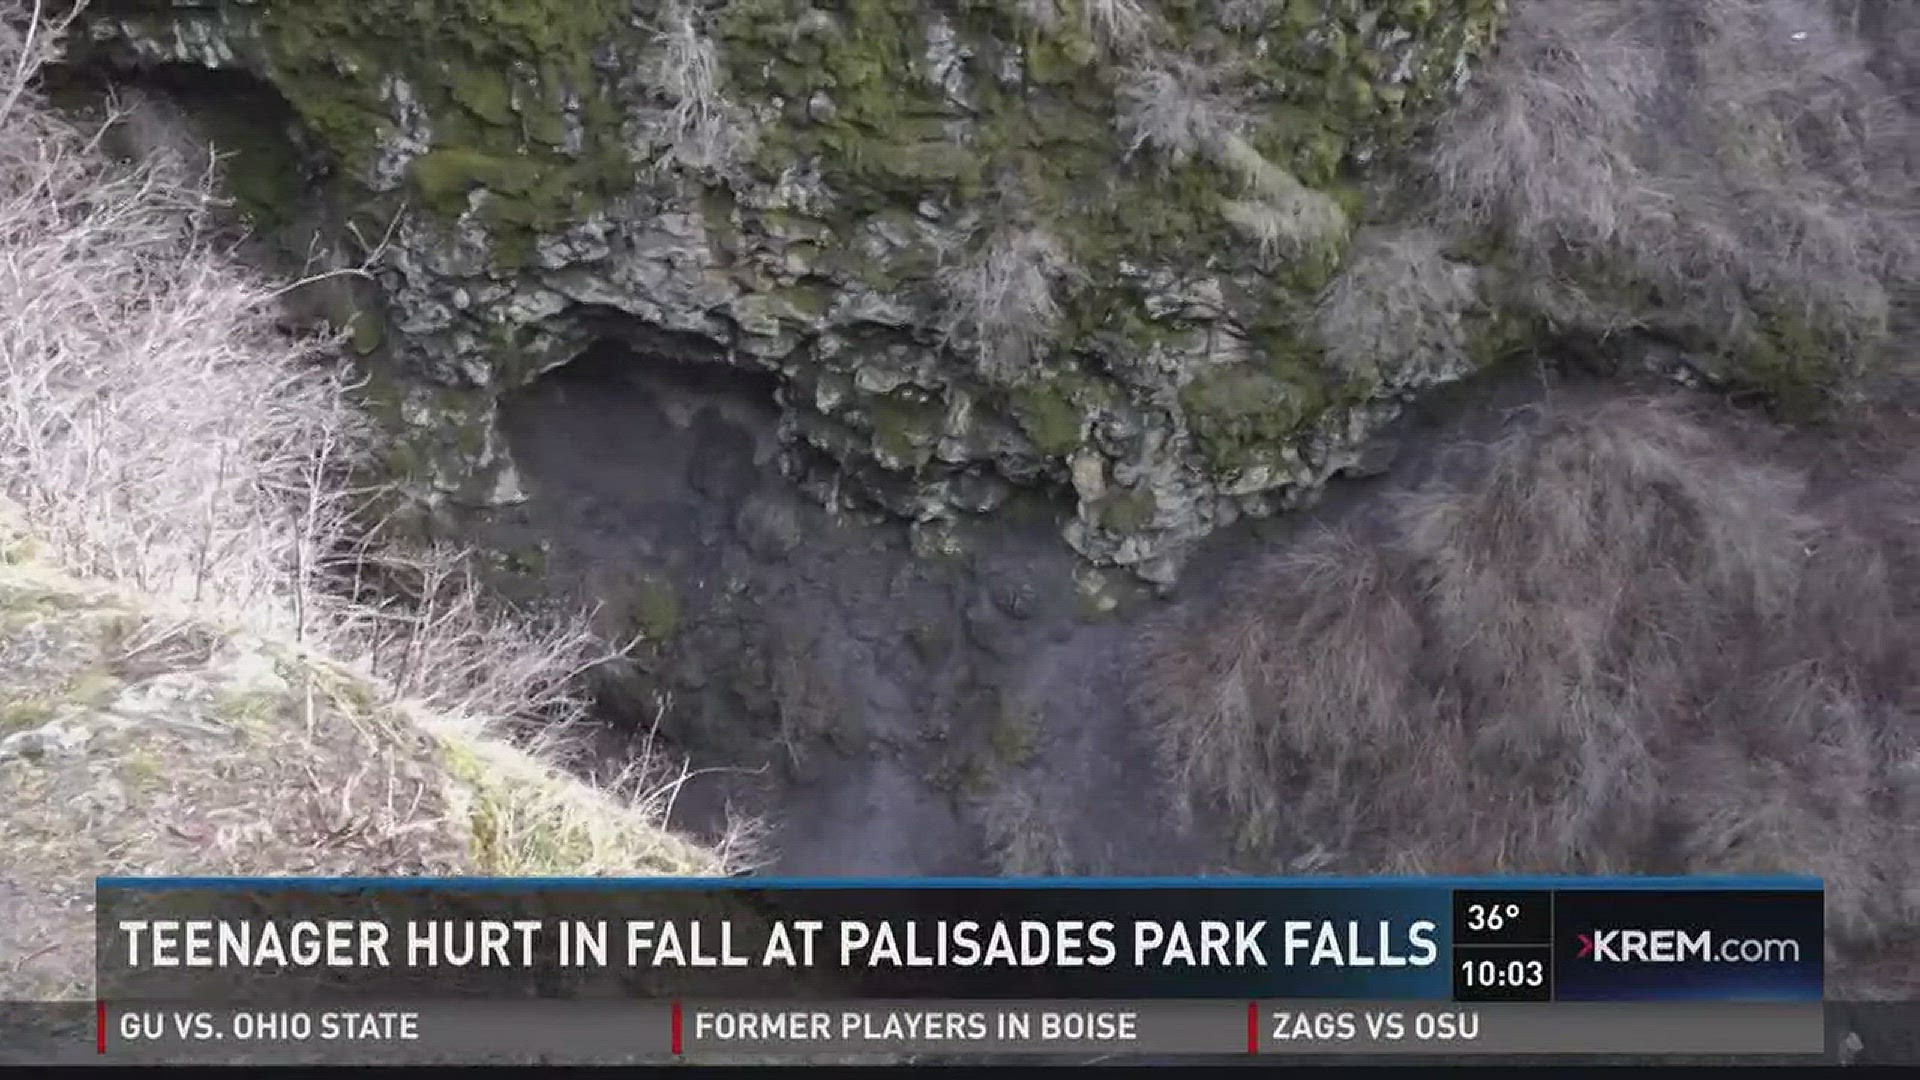 The Spokane Fire Department said a rescue team helped an 18-year-old man after a fall at Palisades Park.